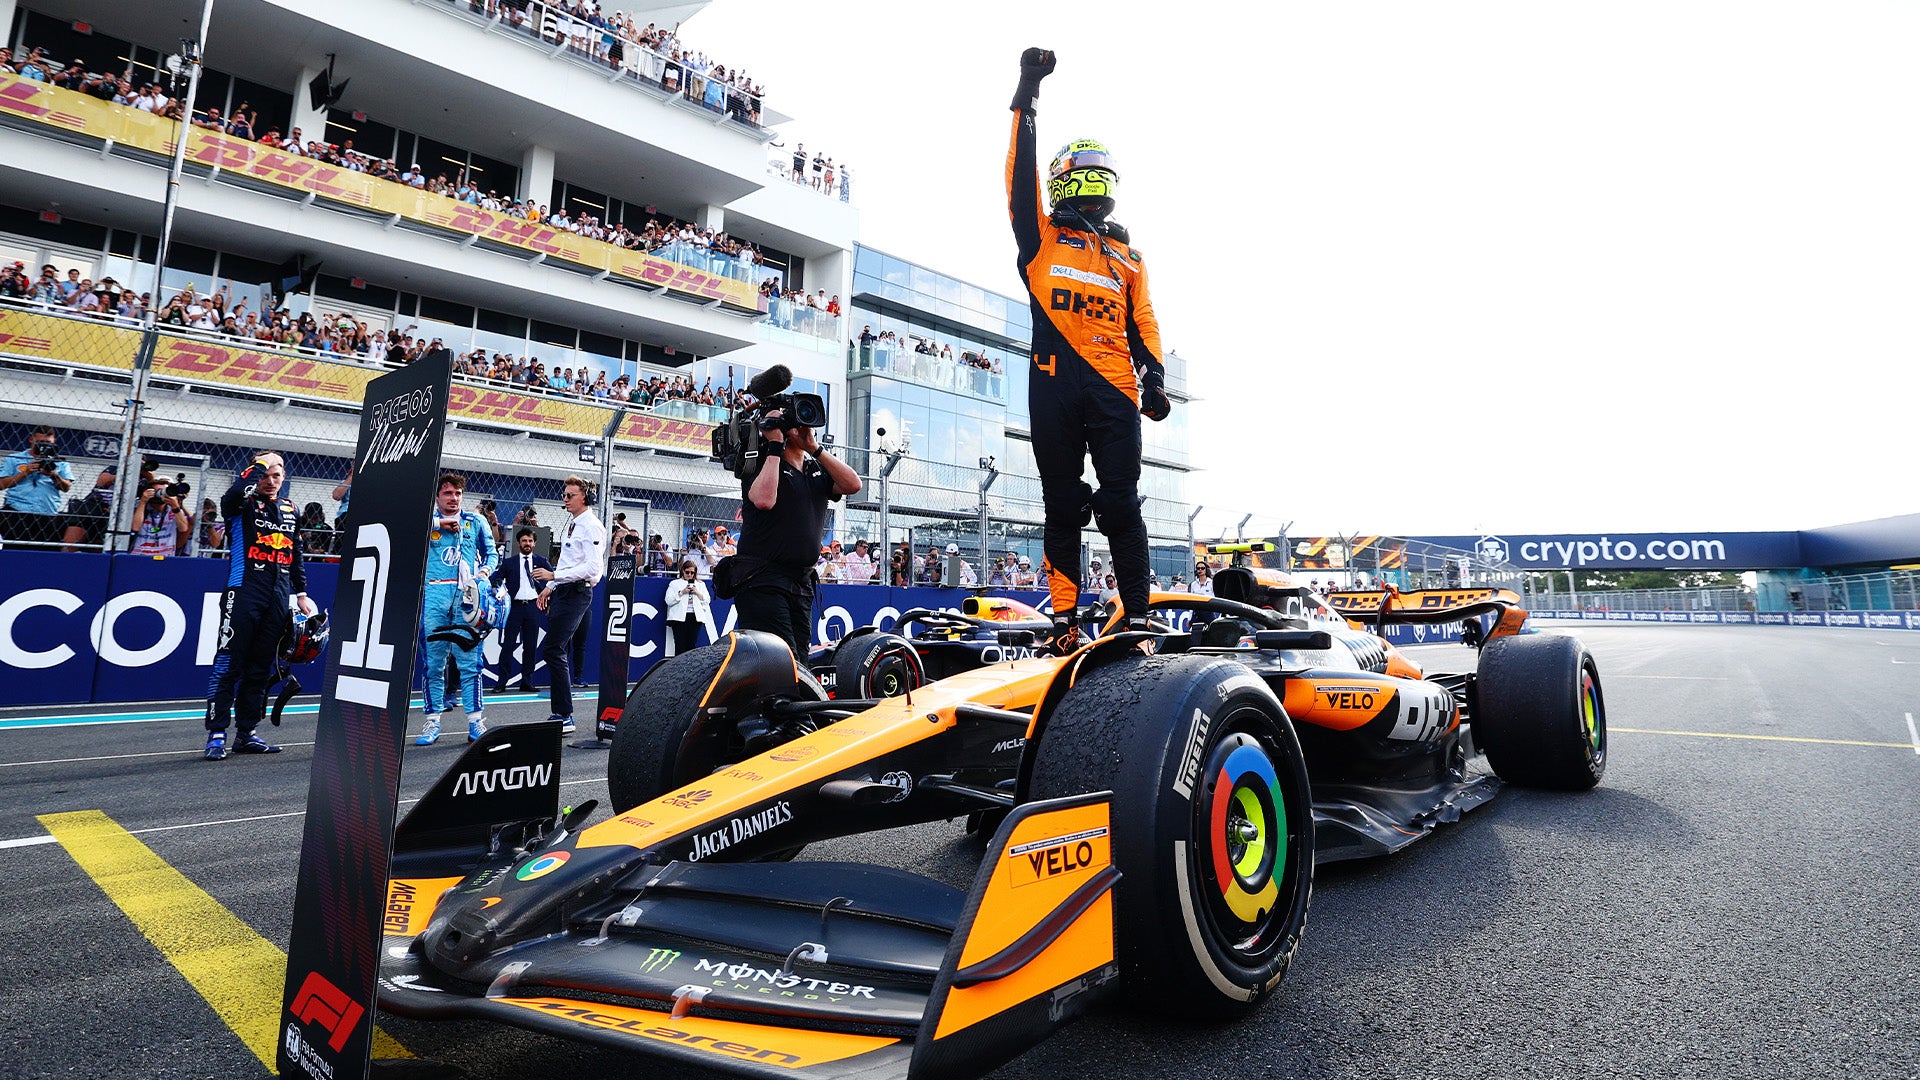 Lando Norris claimed victory in the inaugural F1 Grand Prix race, much to the delight of fans and spectators alike.